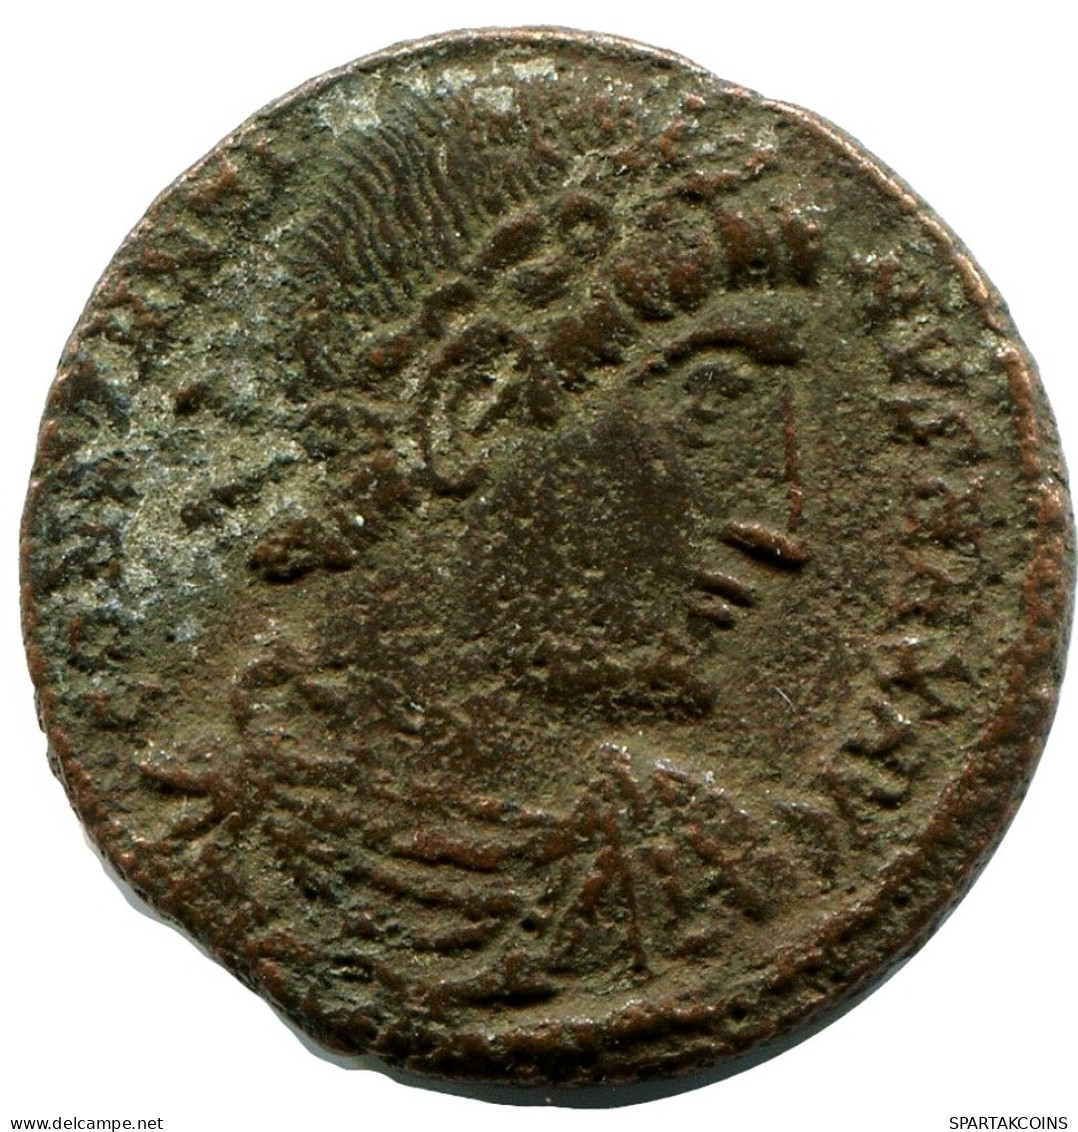 CONSTANTINE I MINTED IN HERACLEA FROM THE ROYAL ONTARIO MUSEUM #ANC11200.14.E.A - El Imperio Christiano (307 / 363)